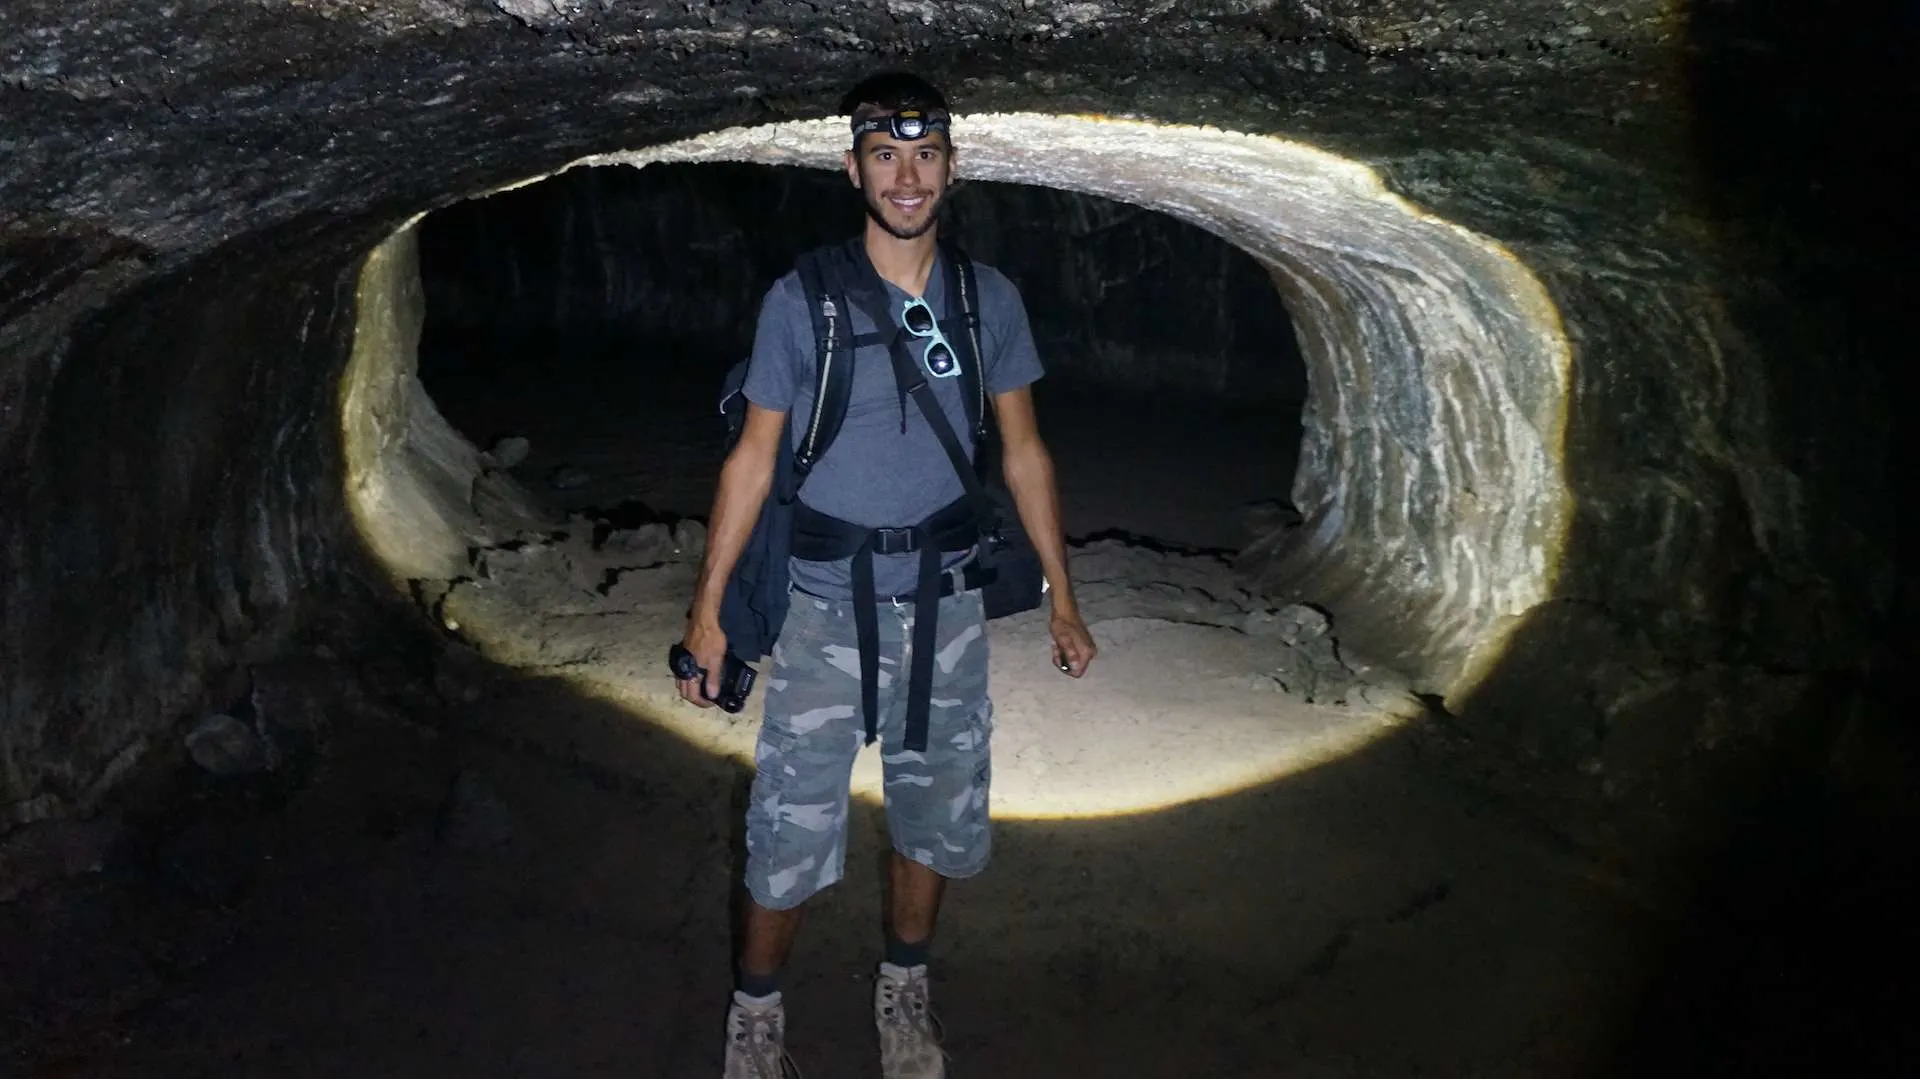 tom standing in a lava tube in northern california